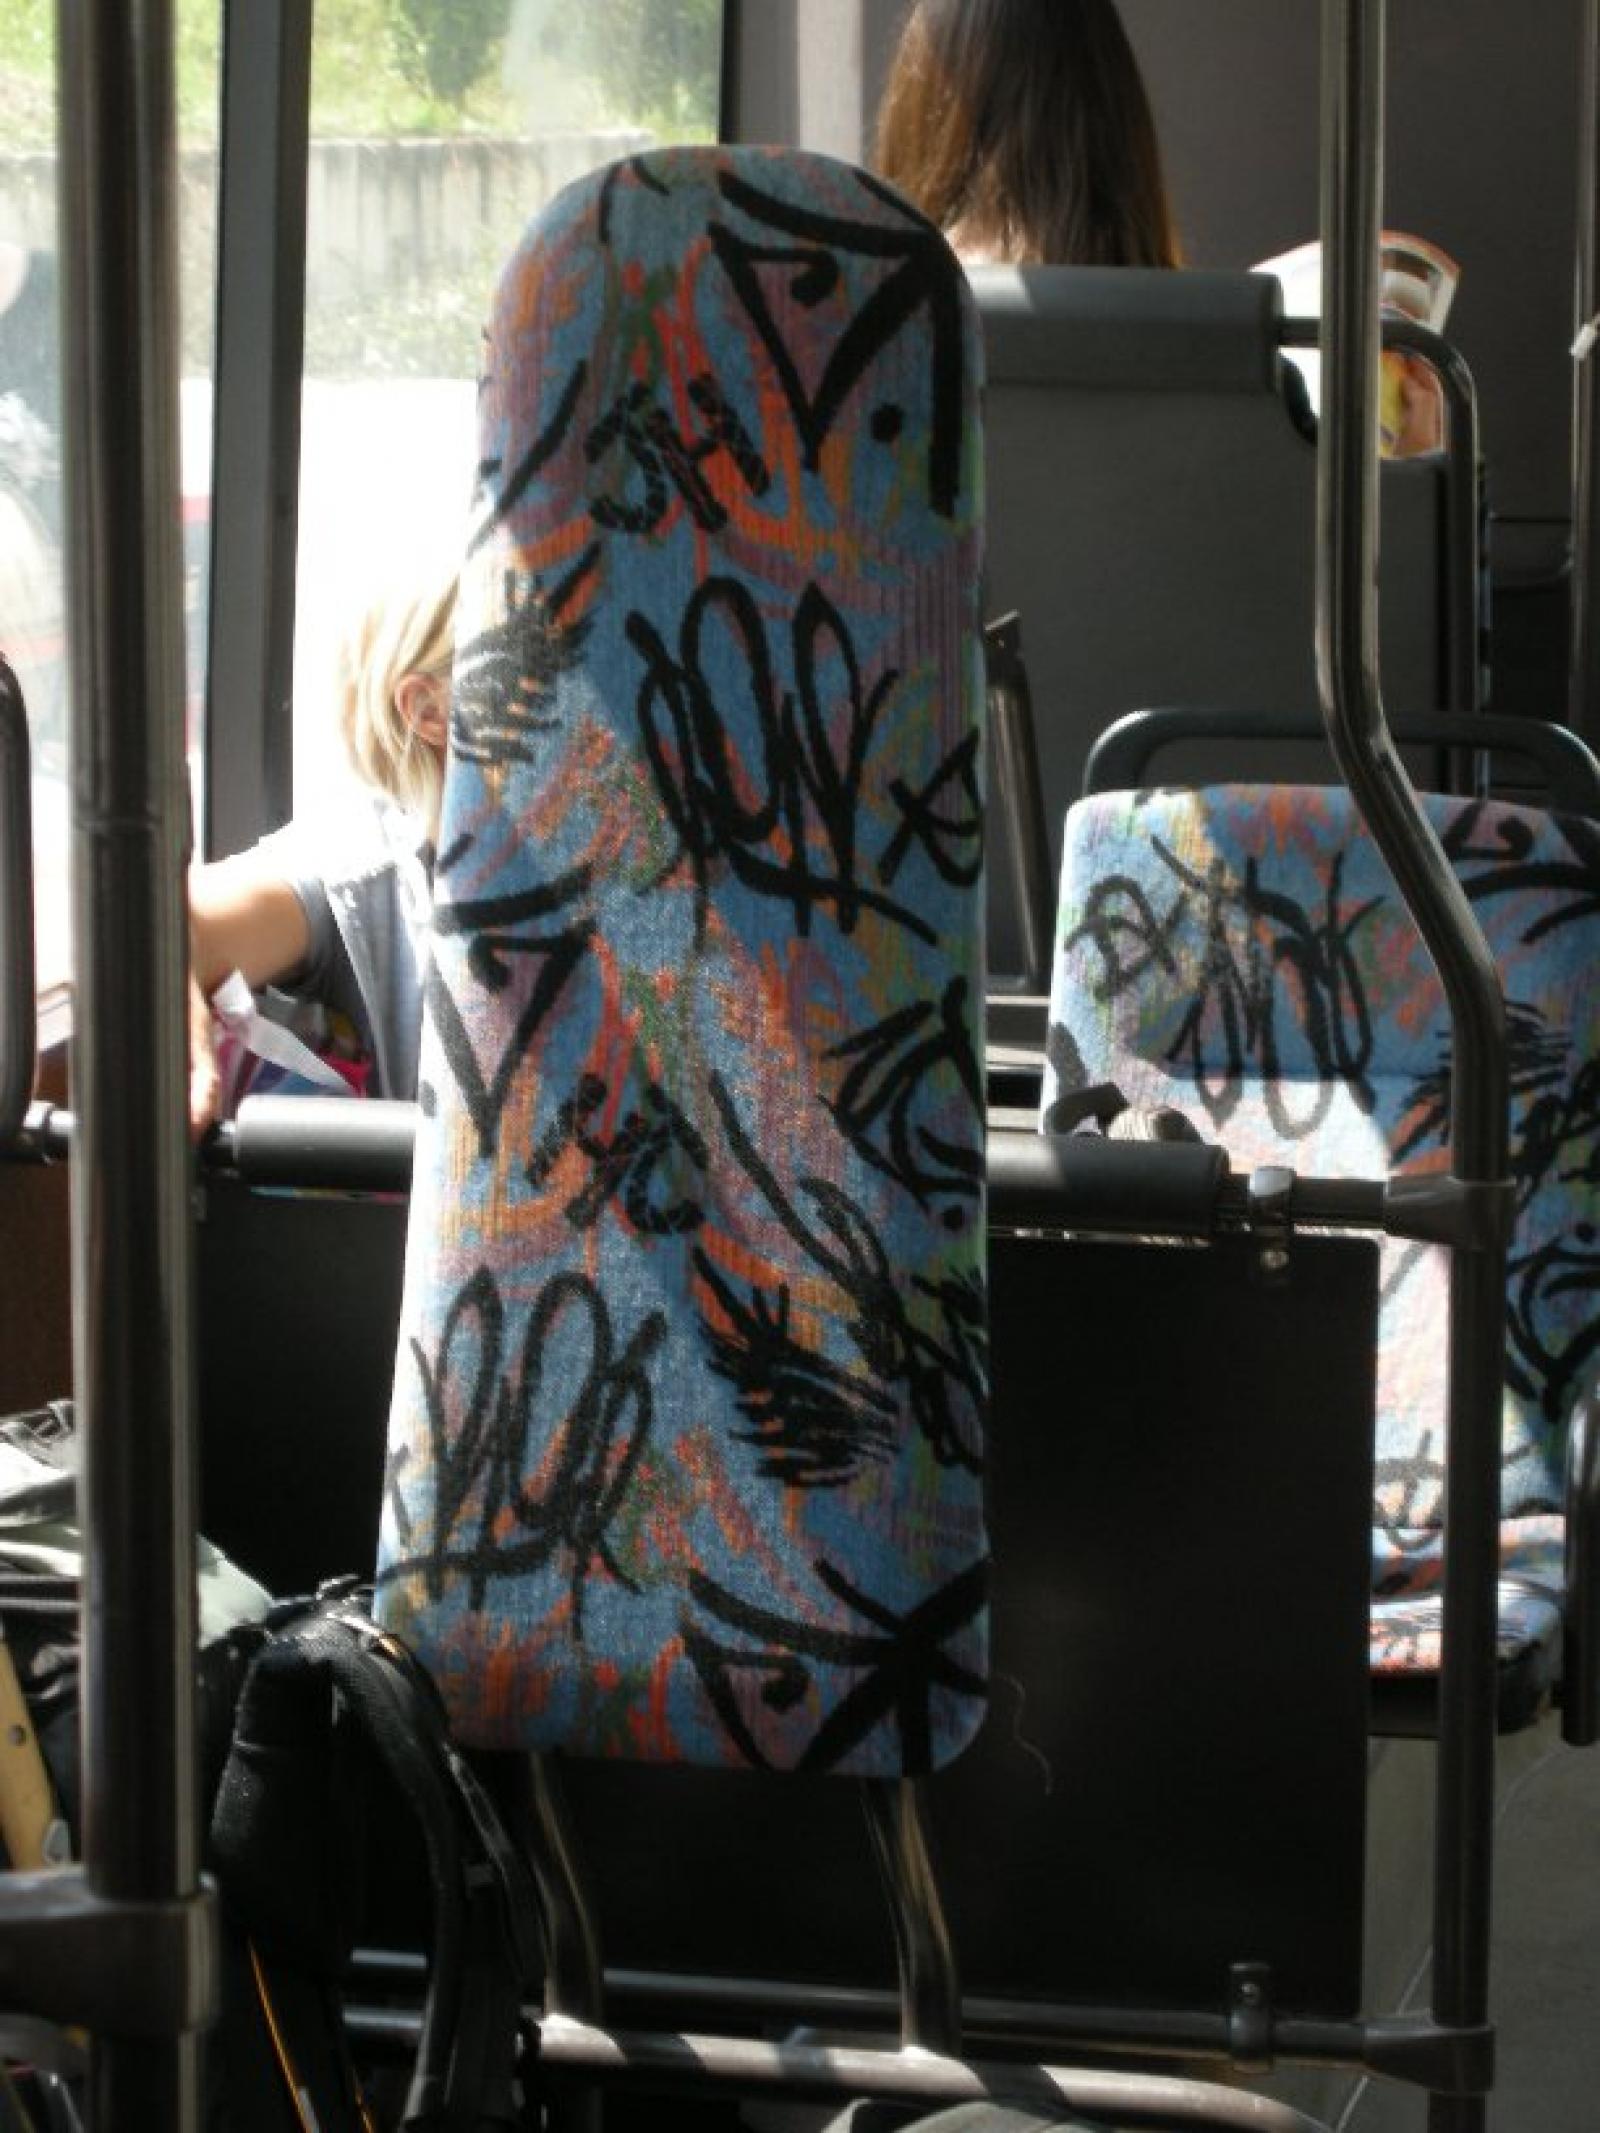 Bus seat cover with tagging built in